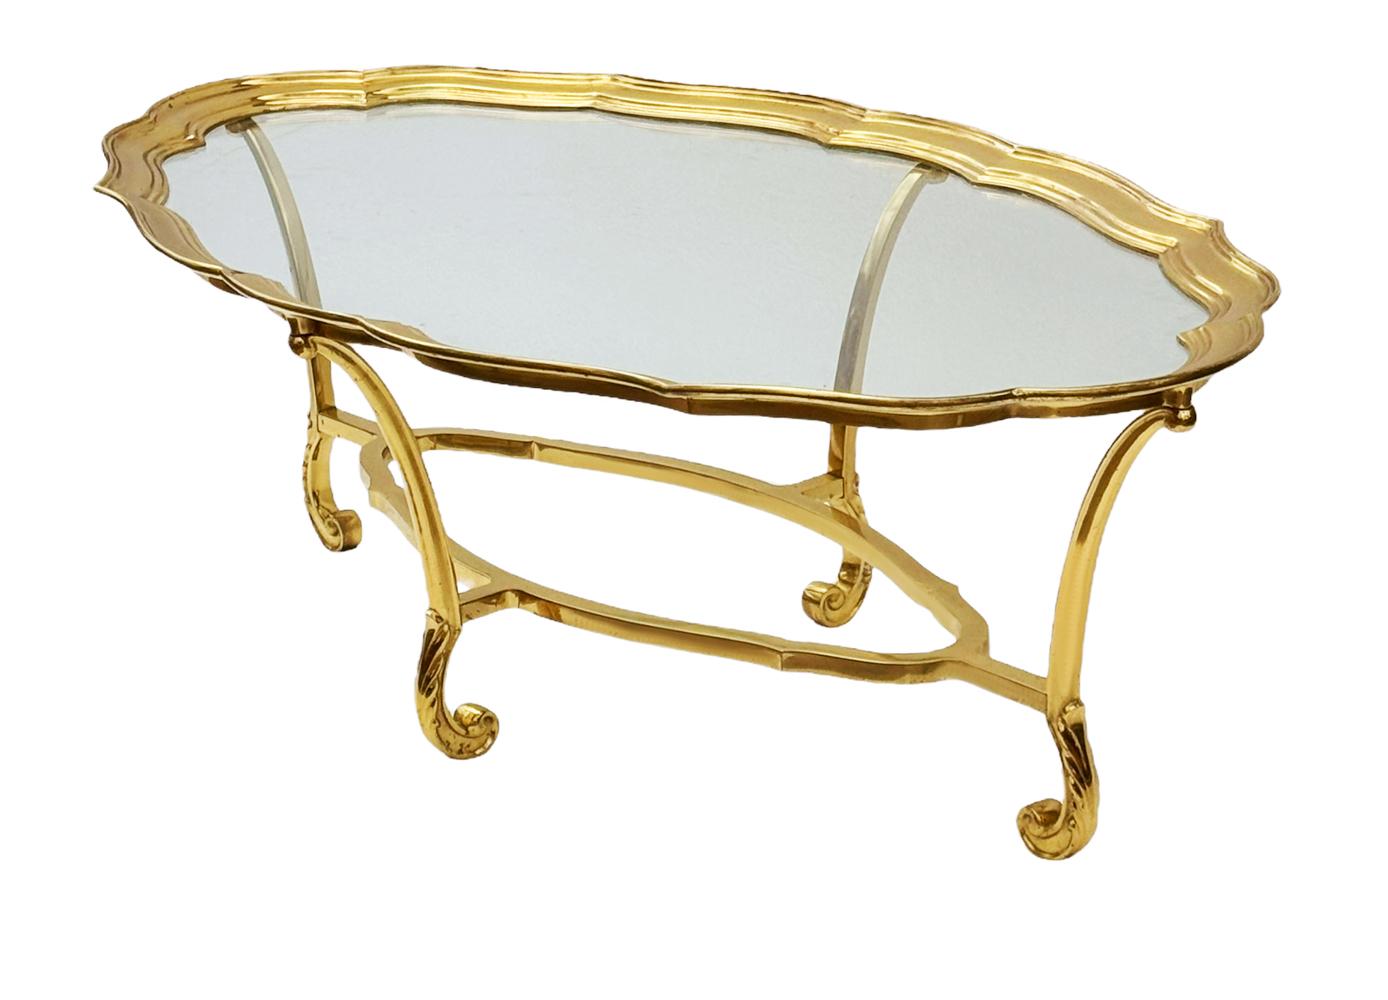 A high quality and elegant design made by LaBarge in France in the 1980s. It features heavy solid brass construction with inlayed clear glass top.